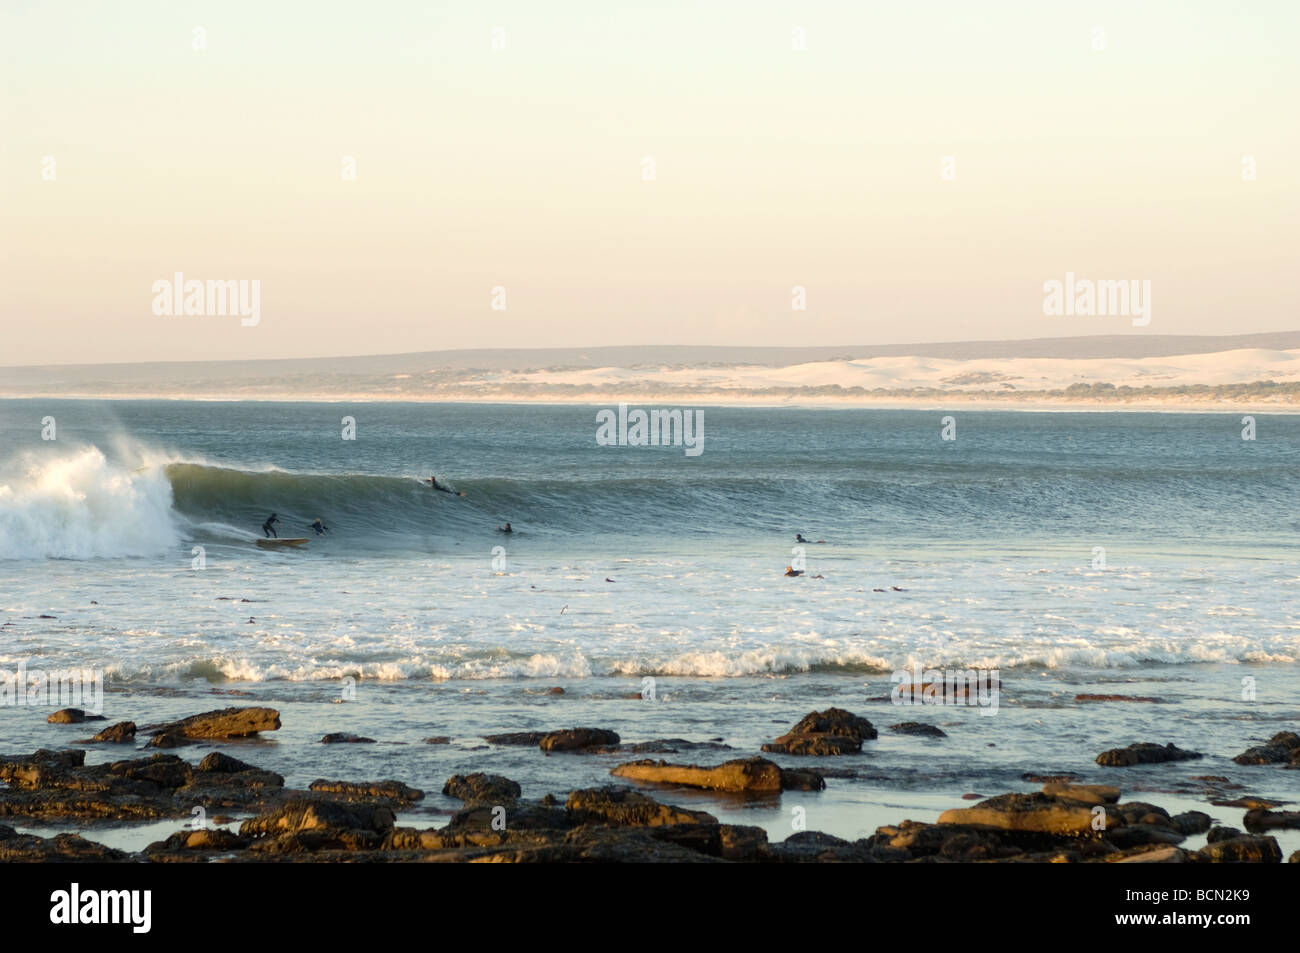 Surfers swimming in water, Elands Bay Stock Photo